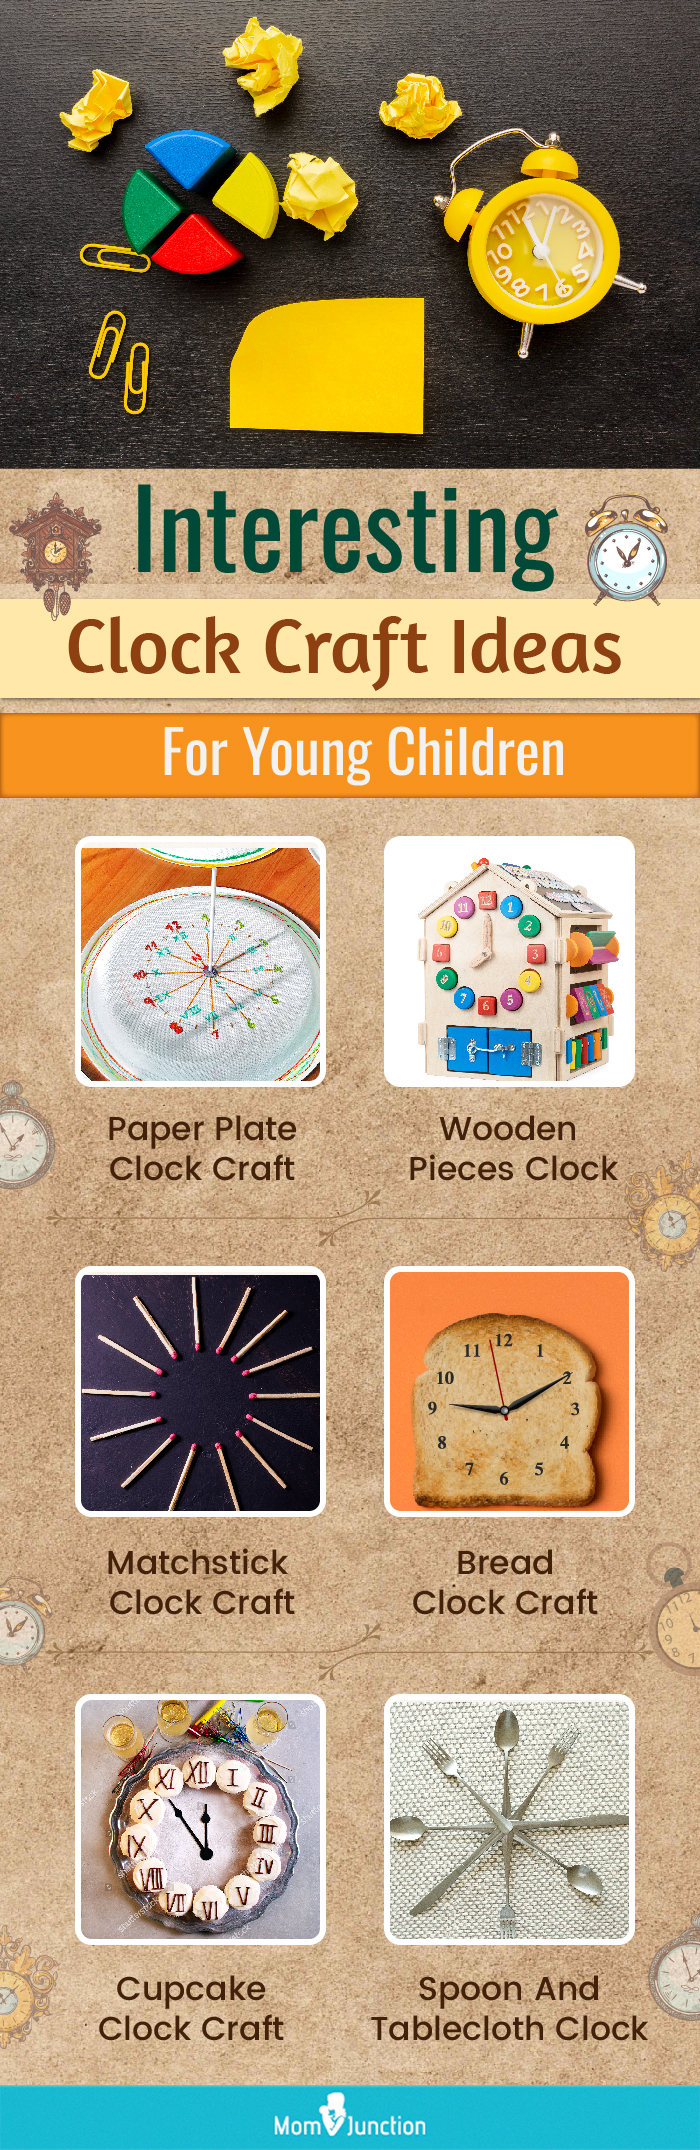 Creative Clock Face Designs for Your DIY Projects